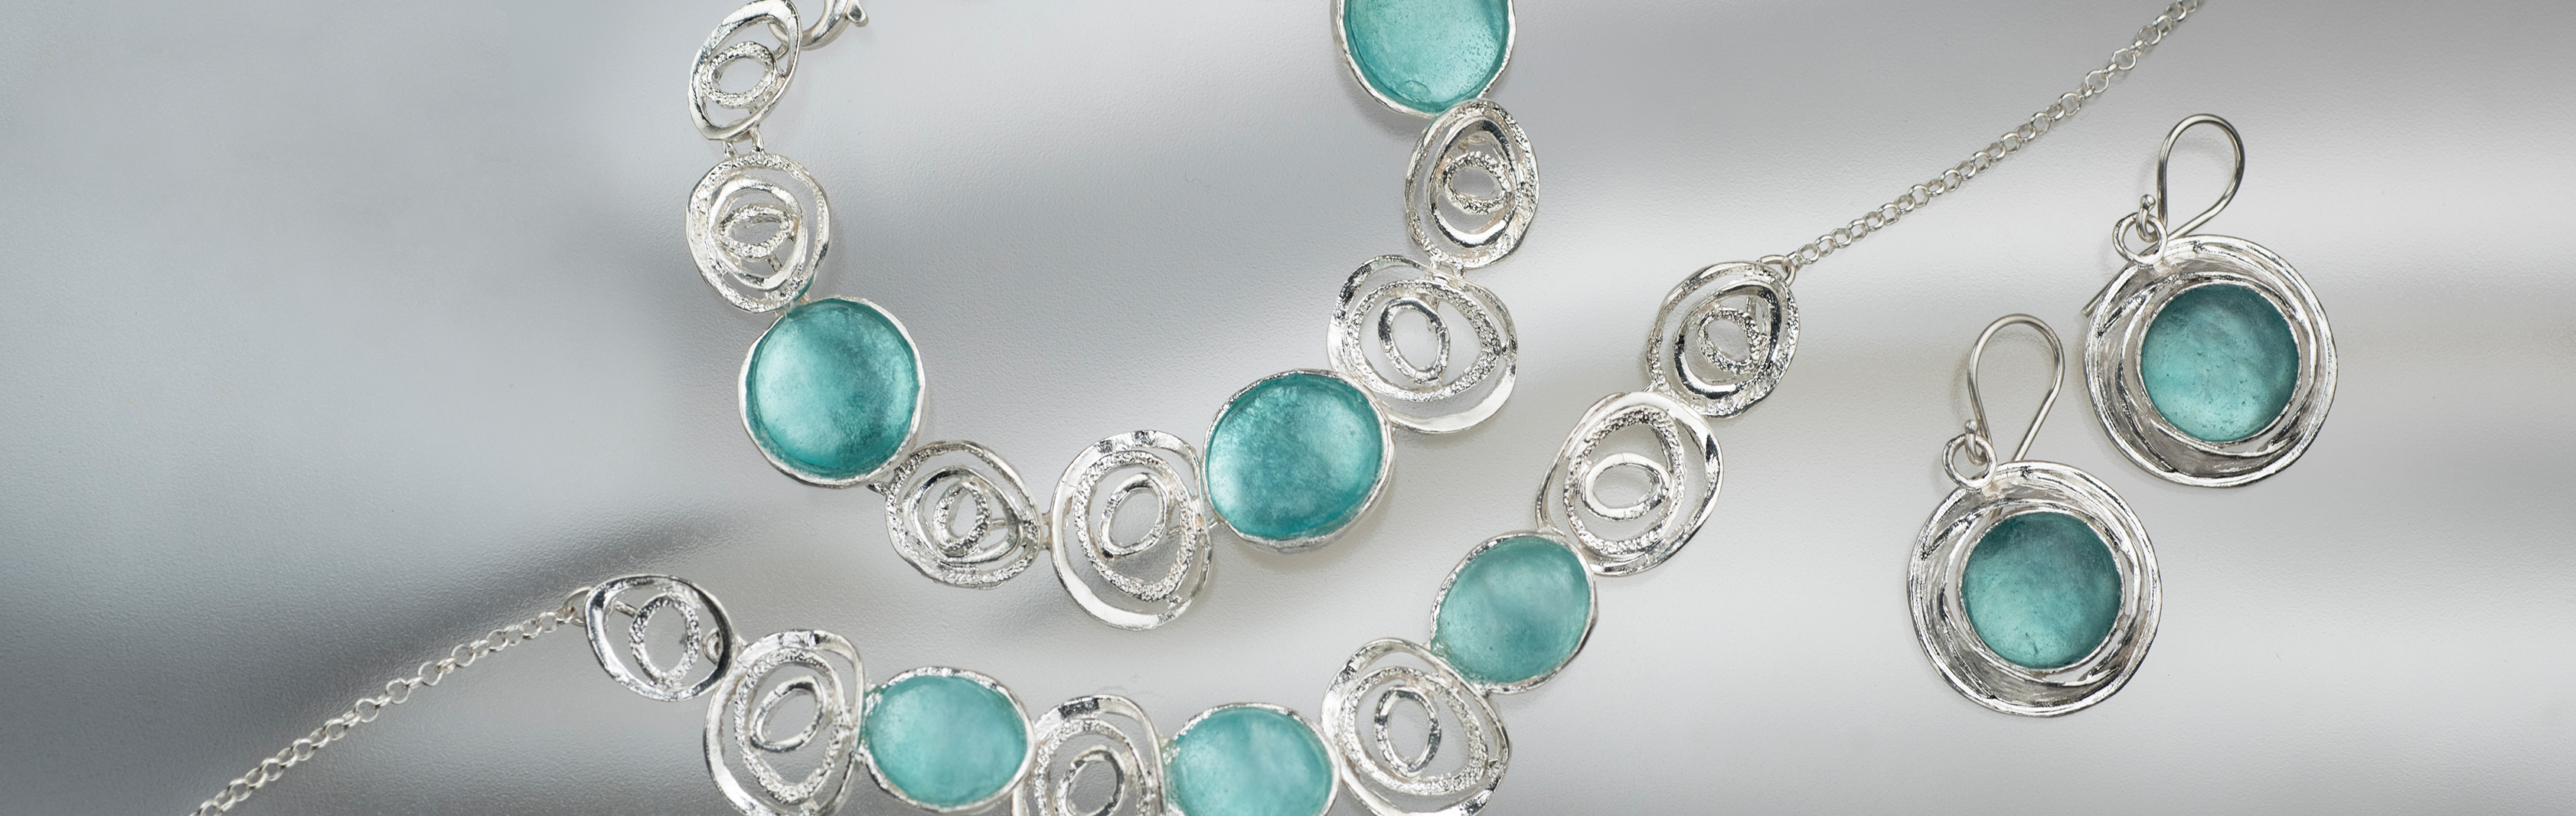 Roman Glass Spiral Collection | 925 Sterling Silver Jewelry with Roman Glass